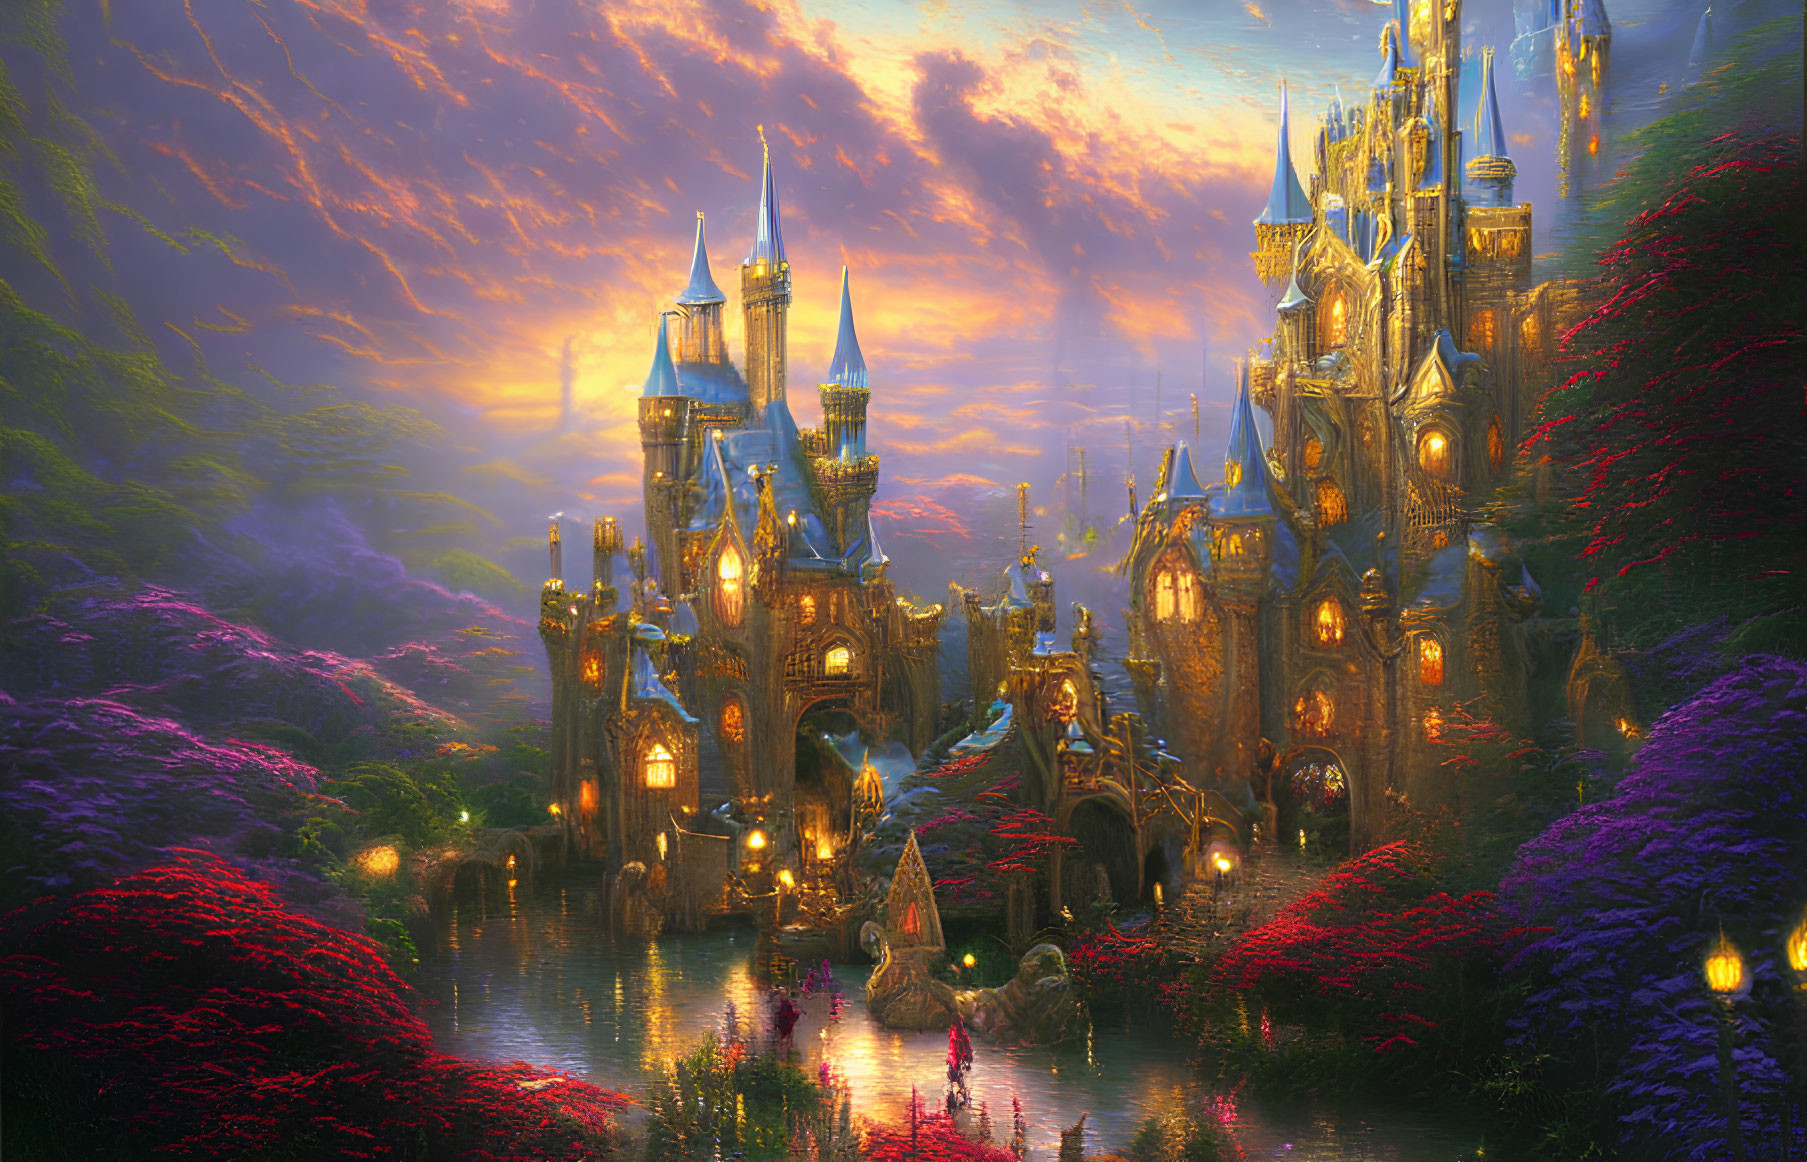 Fantasy castle surrounded by lush gardens and vibrant flora at sunset